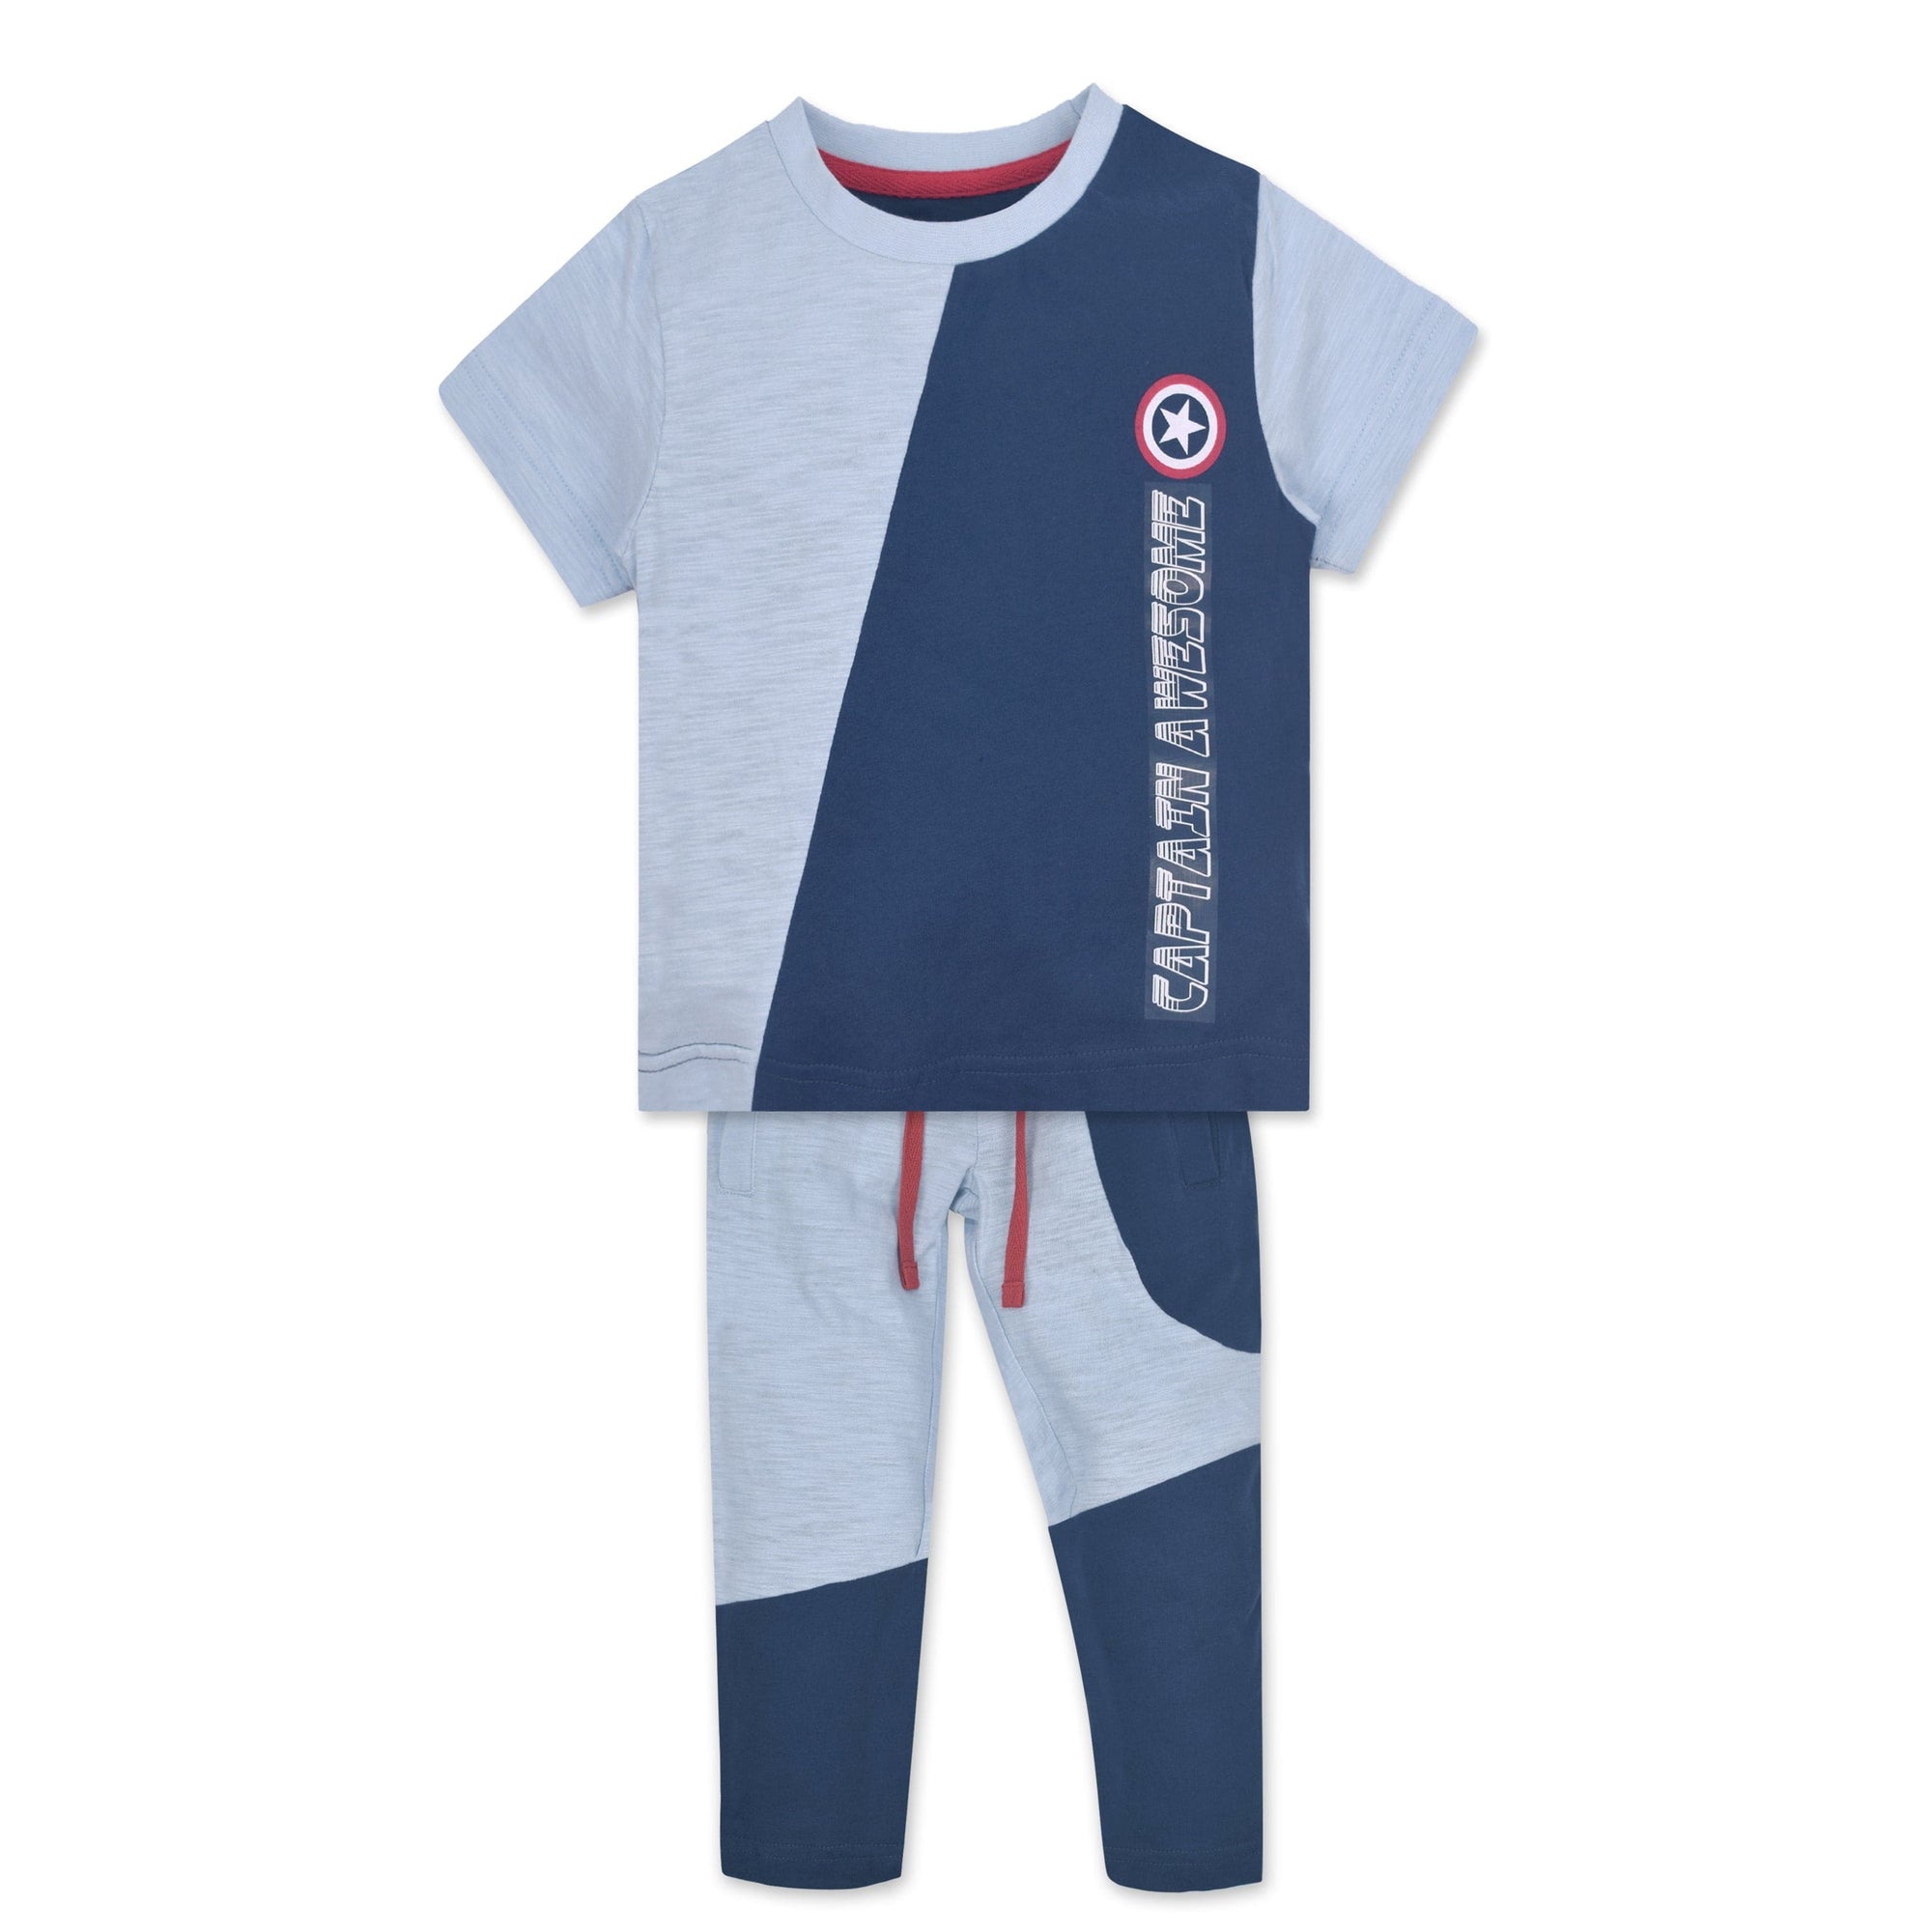 Stone Harbor Boy's Tracksuit BOY'S AWESOME CONTRASTING TWIN SET